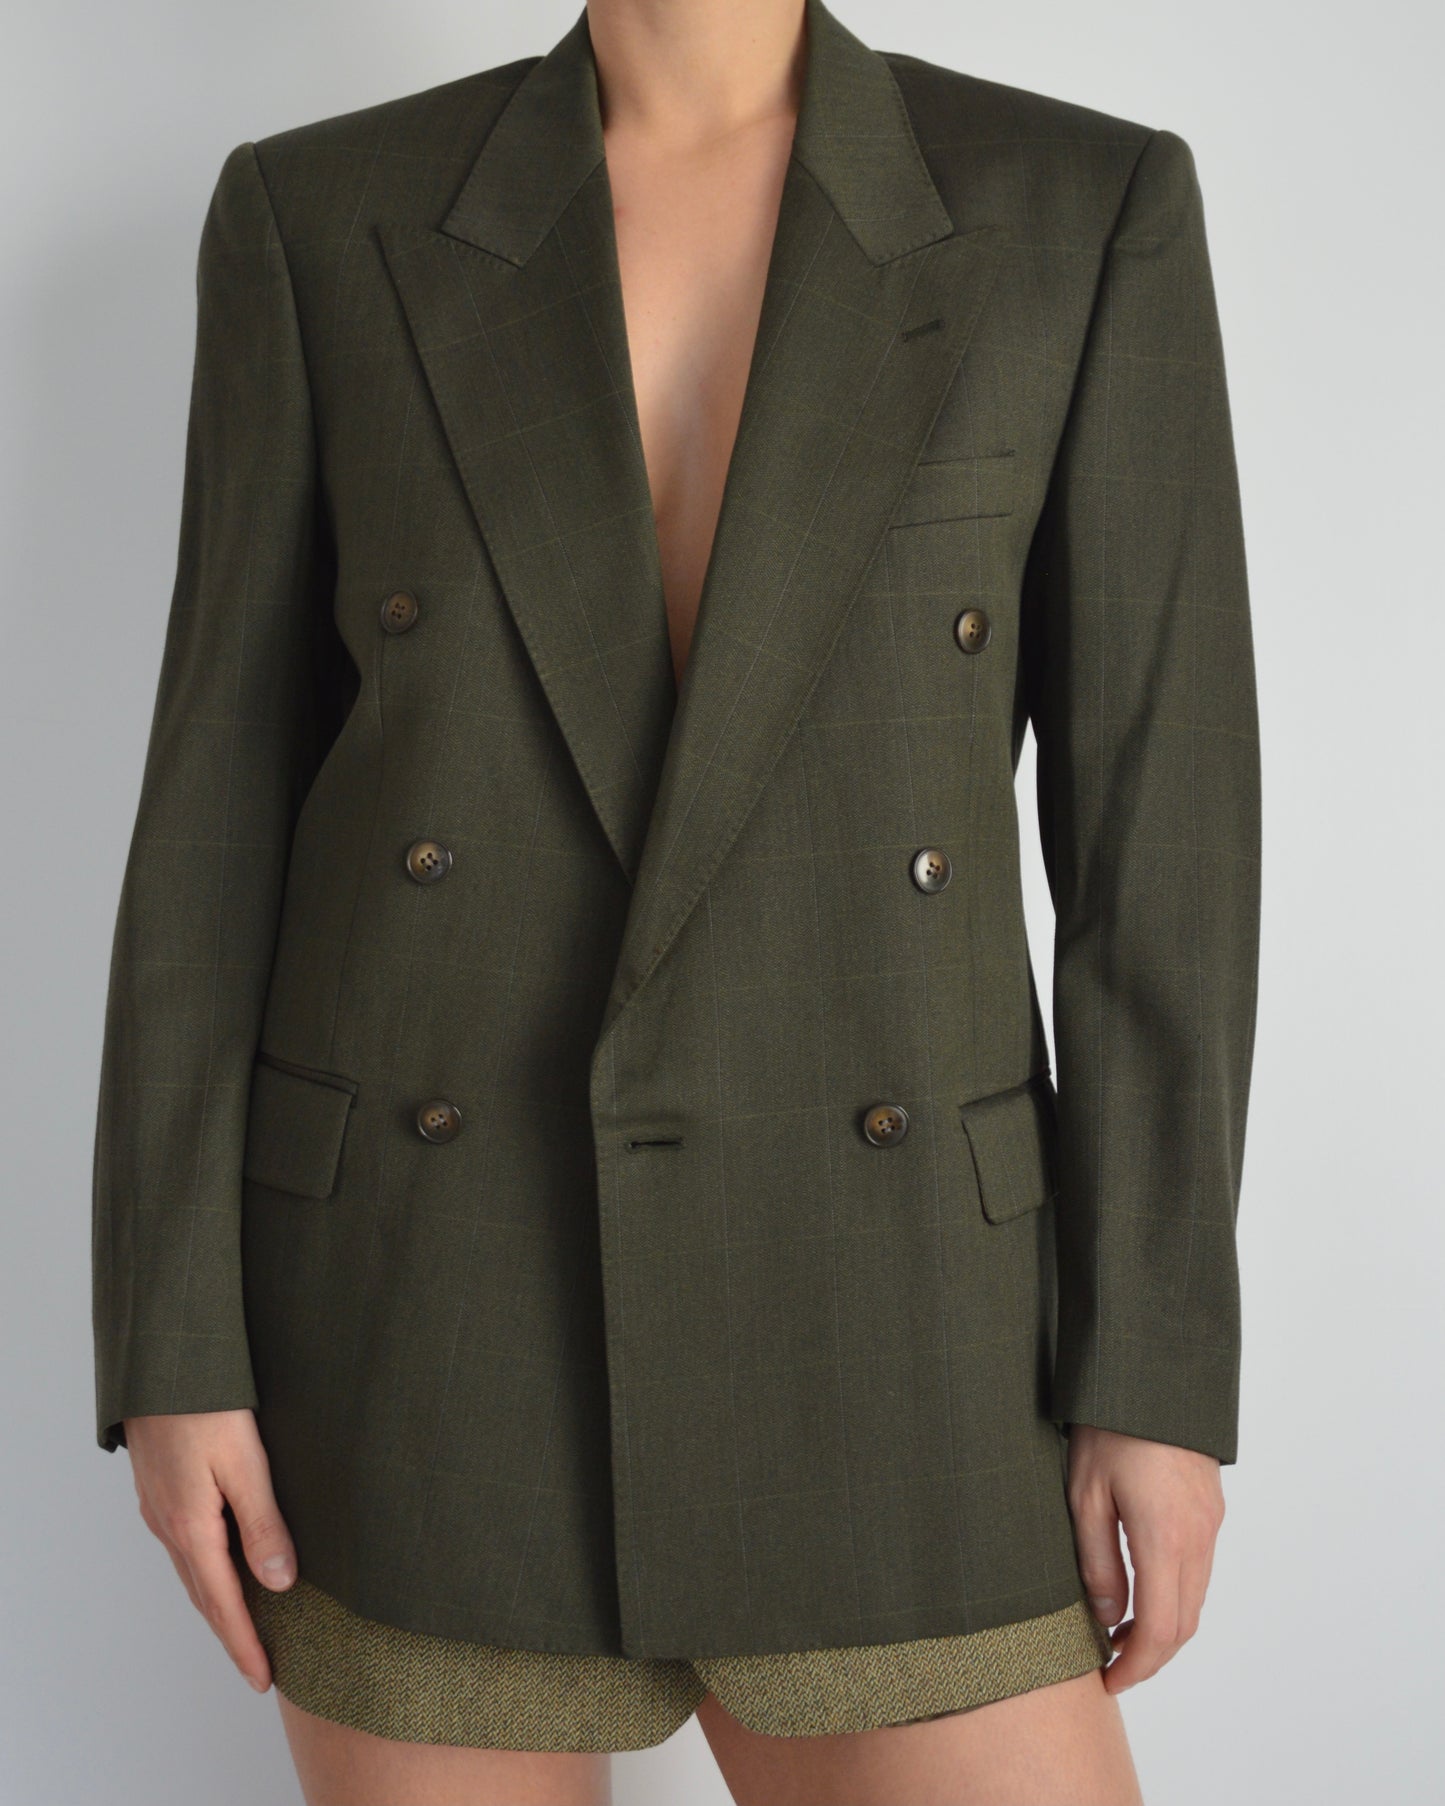 Jacket - double breasted olive green (XS/M)